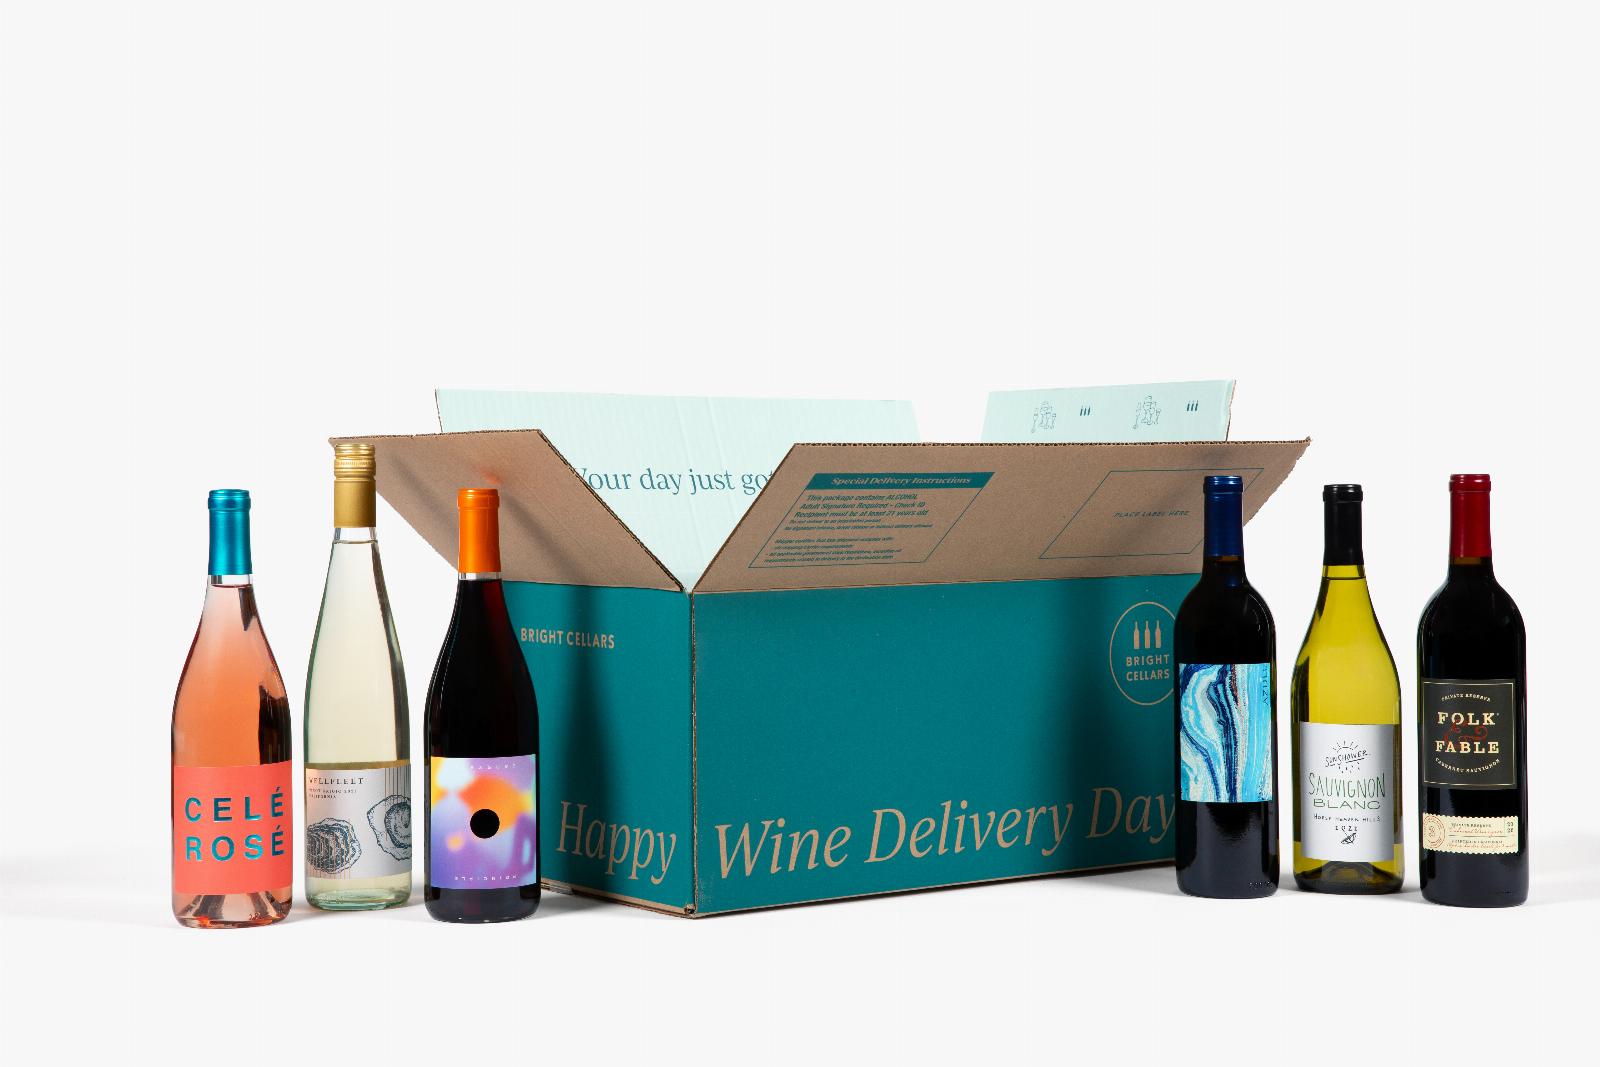 Full Glass Wine raises $14M to continue DTC marketplaces spree, buys Bright Cellars